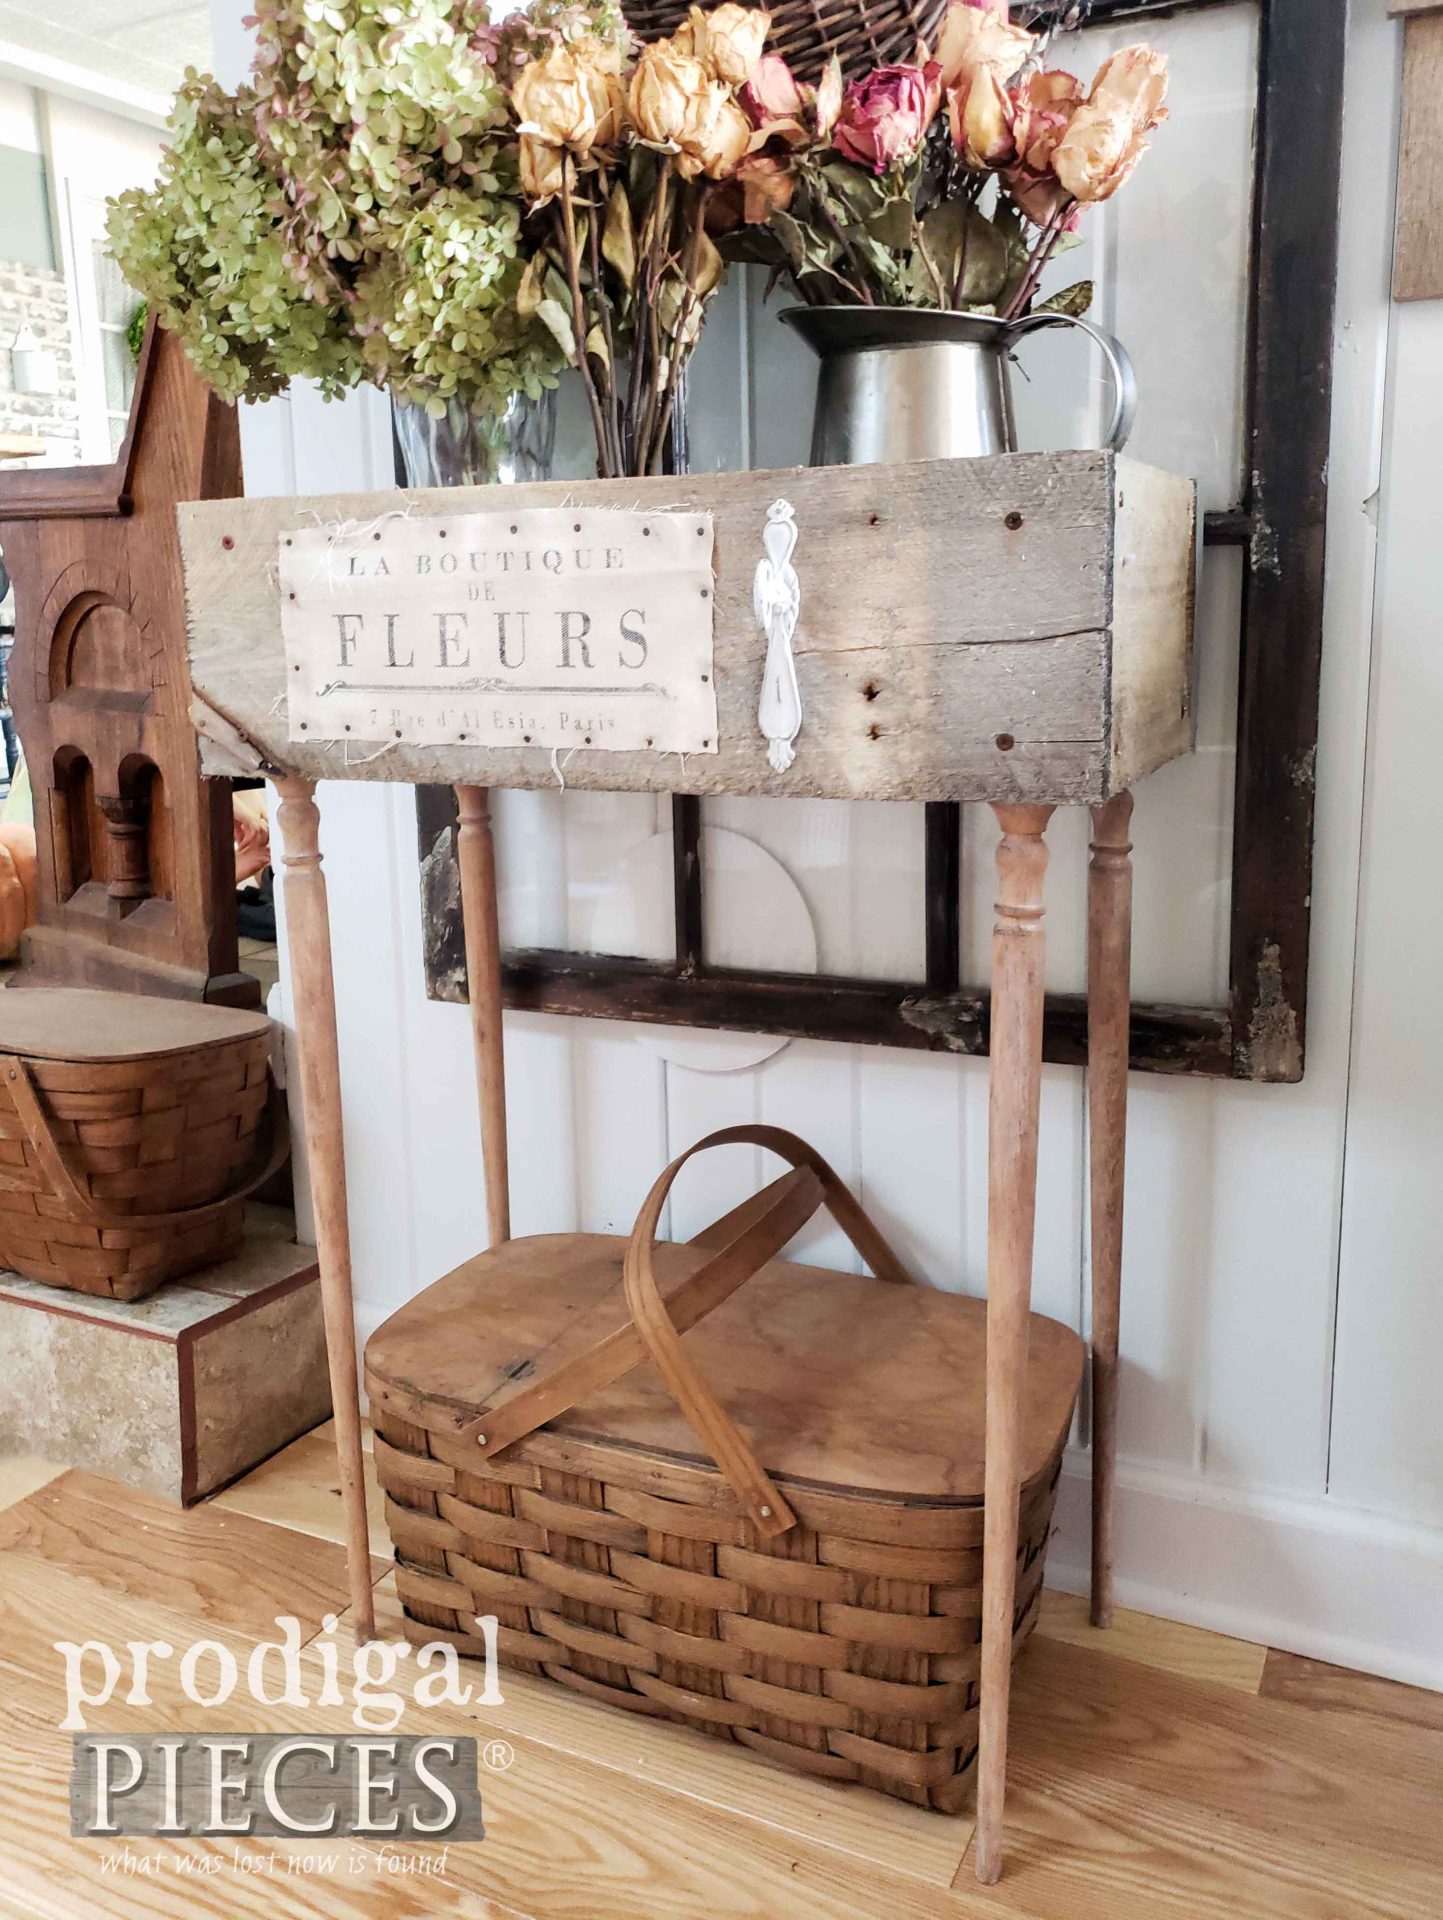 Handmade French Farmhouse Crate Table by Larissa of Prodigal Pieces | prodigalpieces.com #prodigalpieces #french #home #farmhouse #homedecor